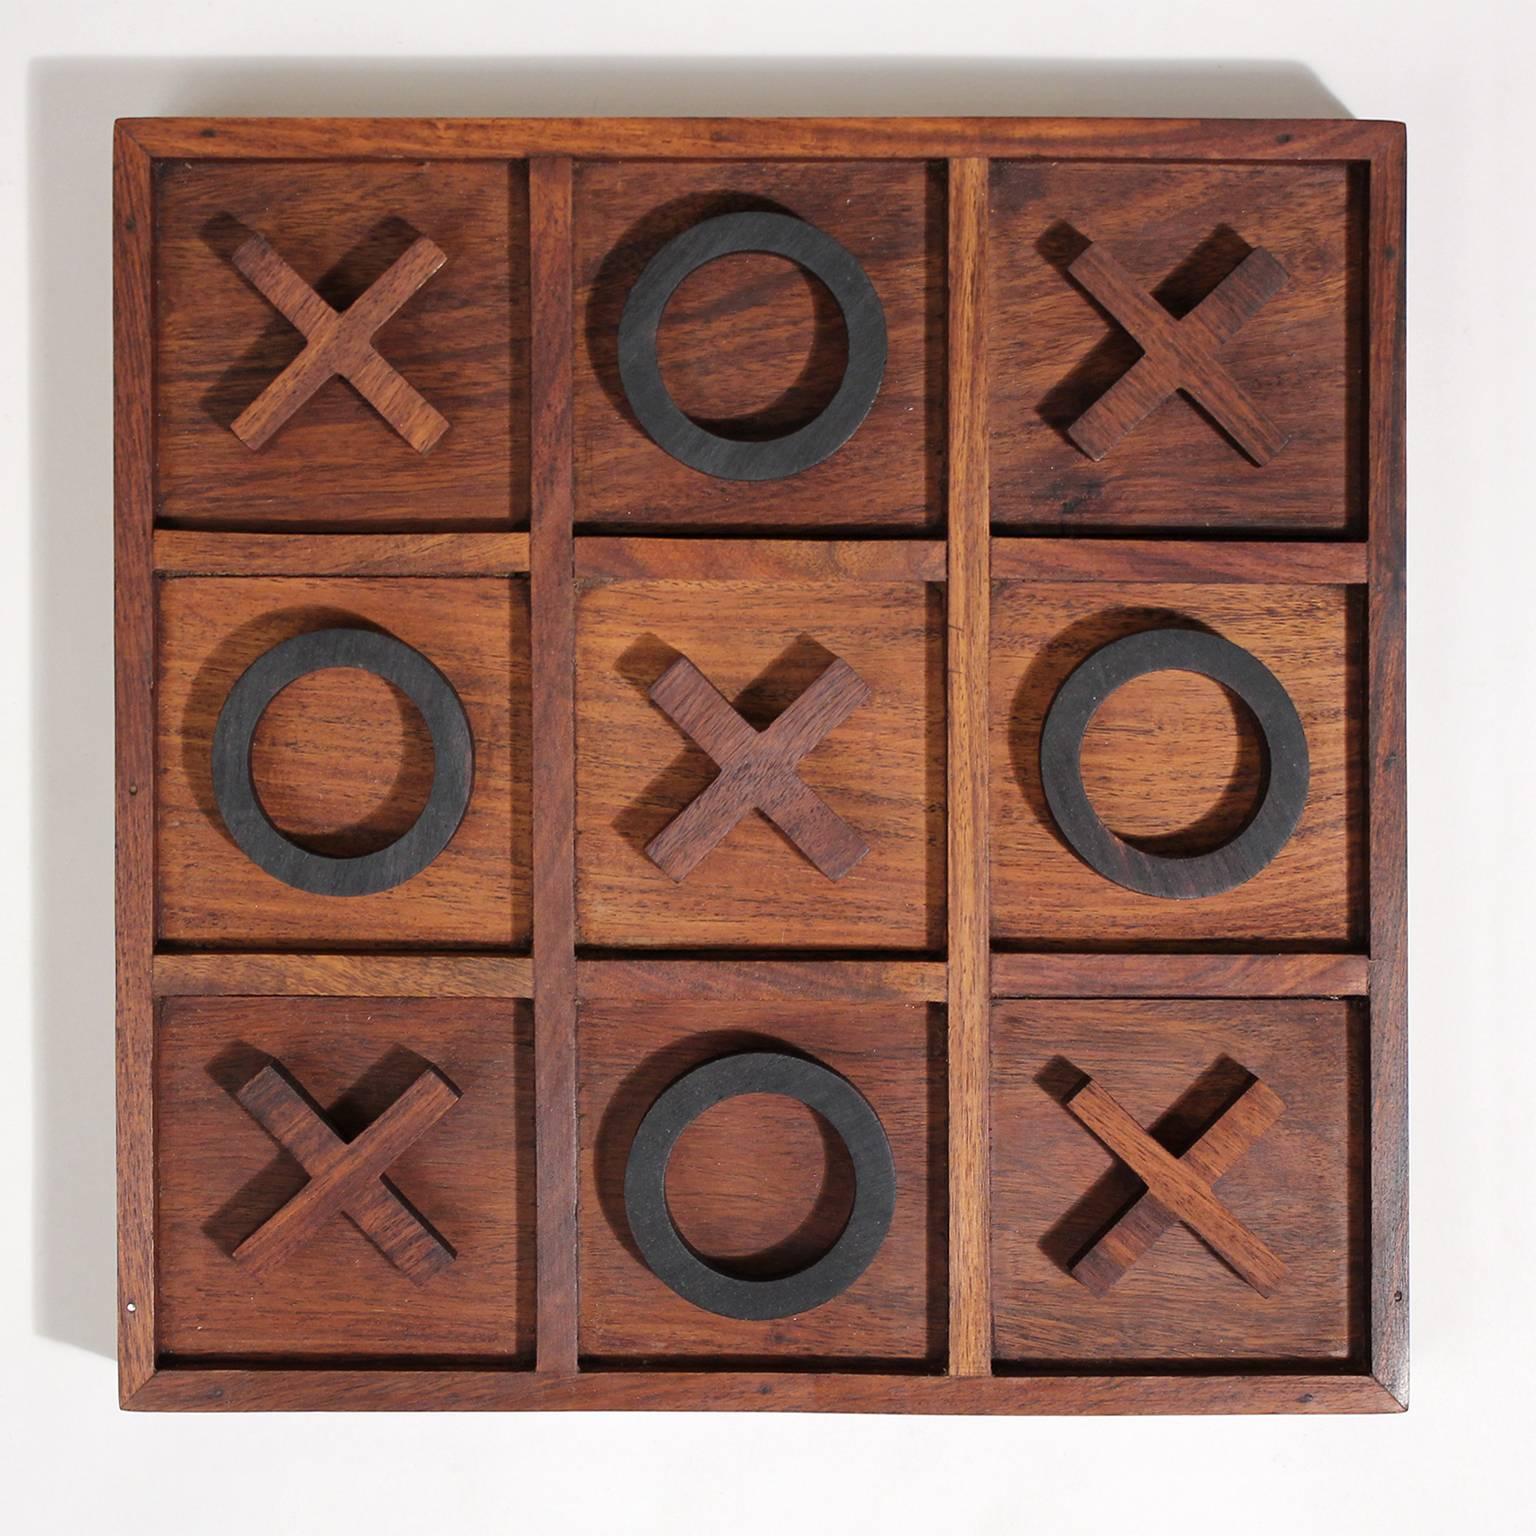 Great handmade modernist craftsman studio Tic Tac Toe sculptural rosewood wood game. Artist made but no signatures. Each piece was hand-carved and well made. Woods are rosewood, walnut and ebony. In great shape. One of a kind item.